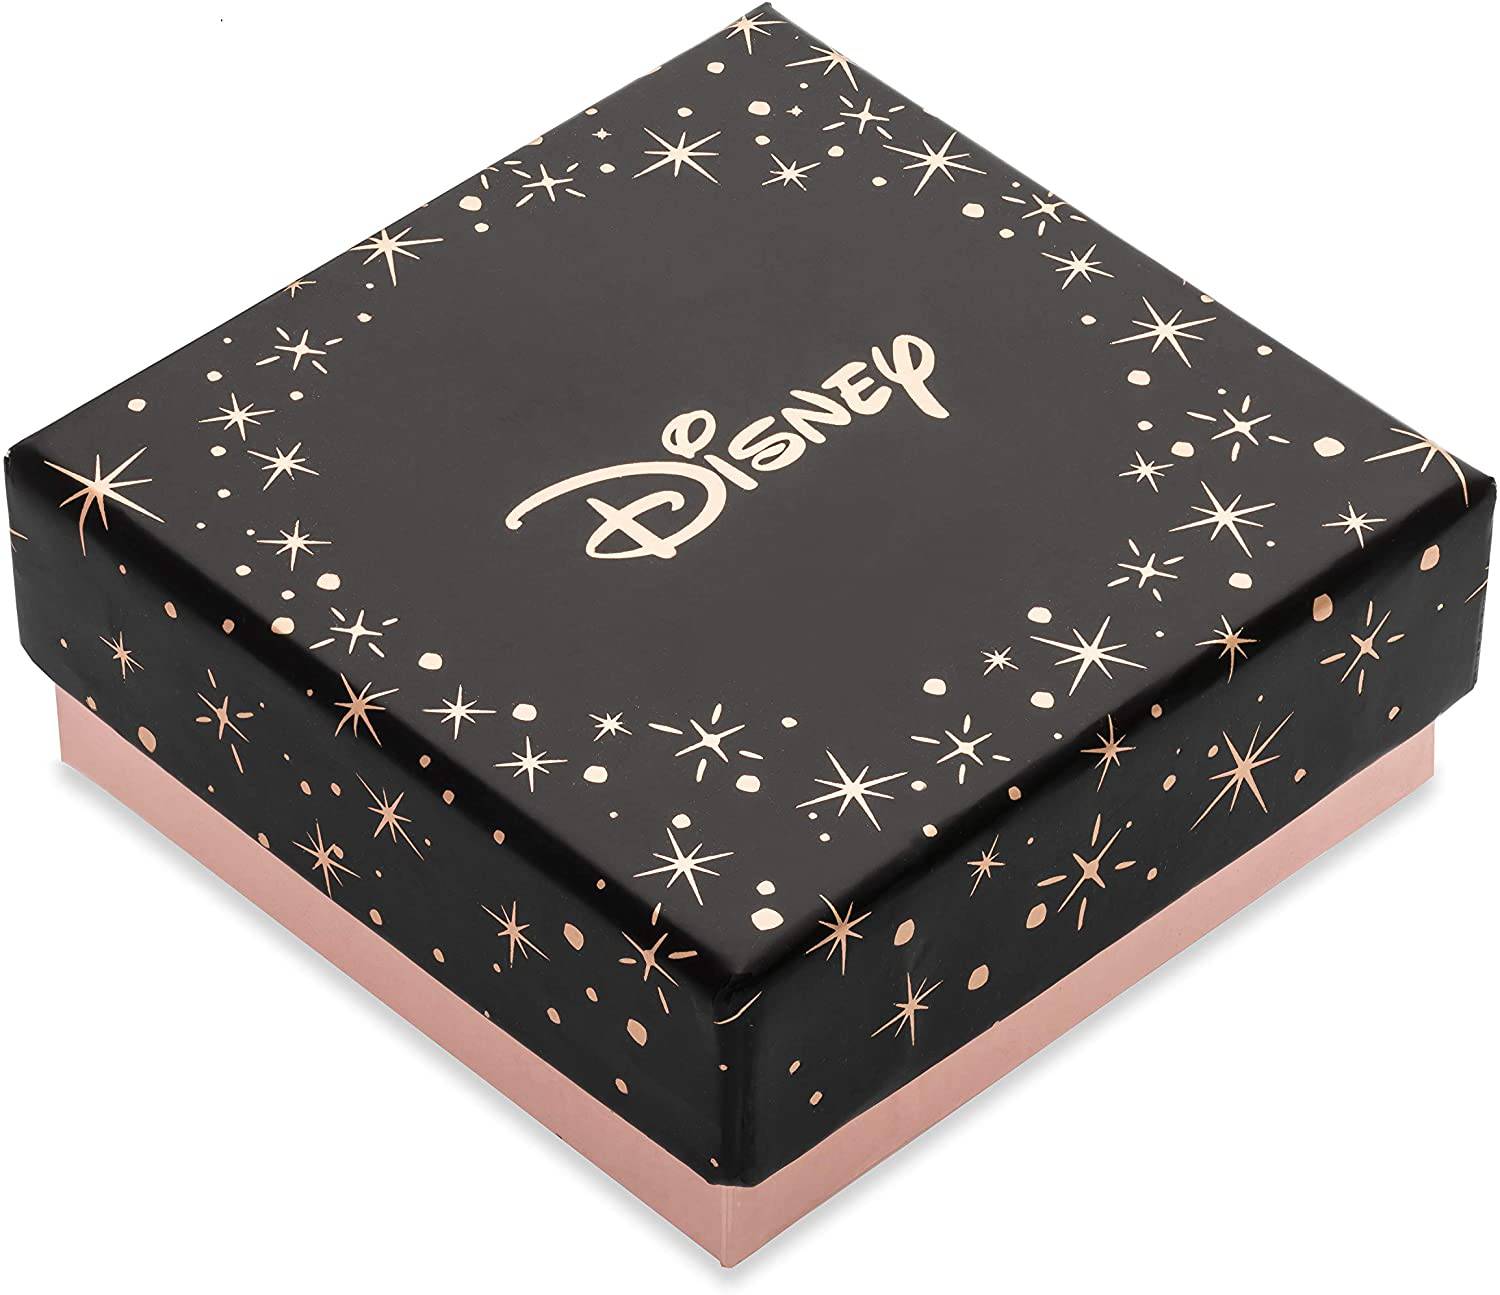 An image of a Minnie Mouse Initial Necklace being stored inside of its box